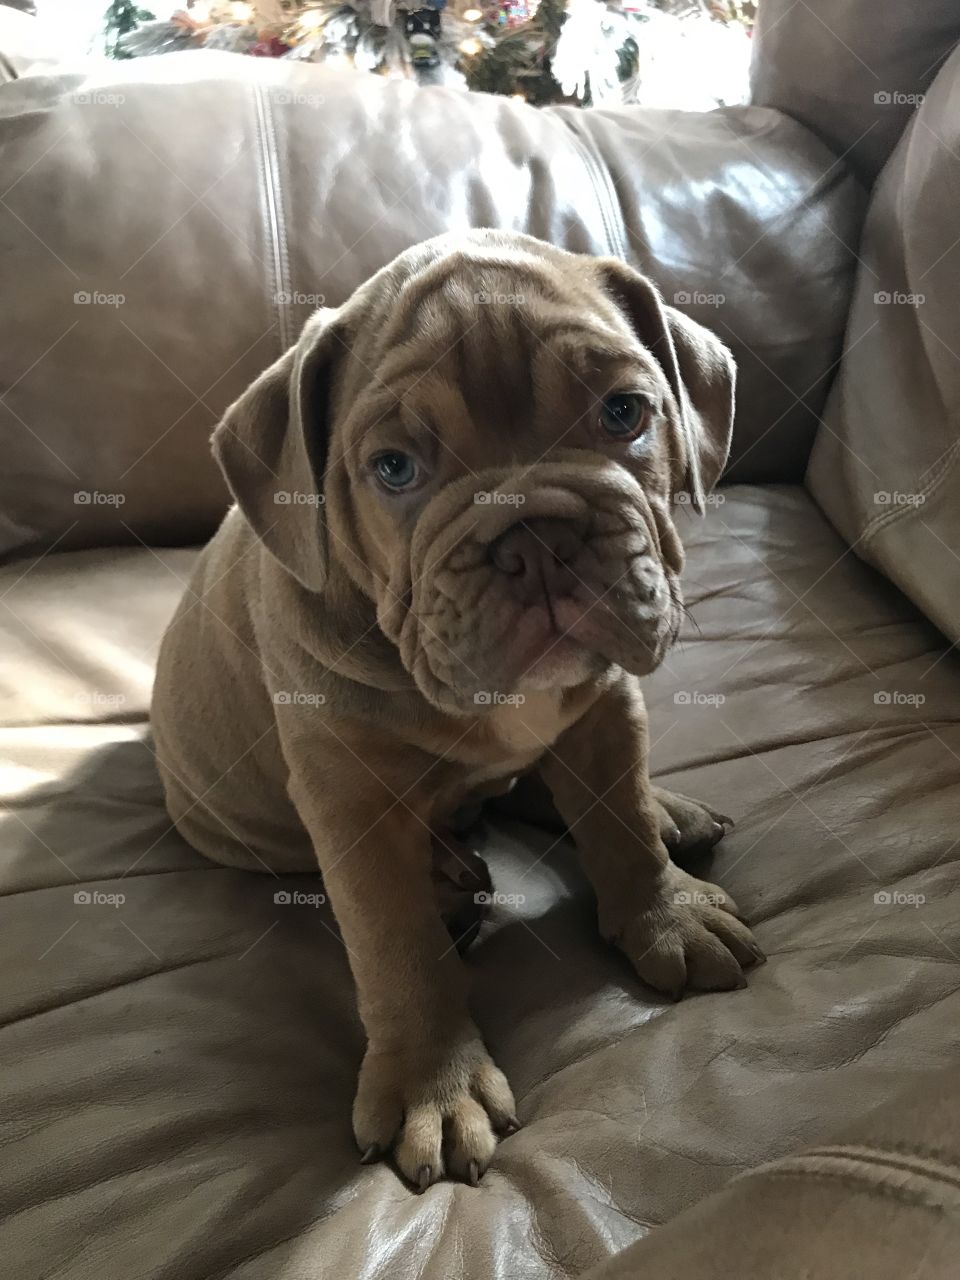 Have you ever seen a sweeter face then this adorable little bulldog puppy?